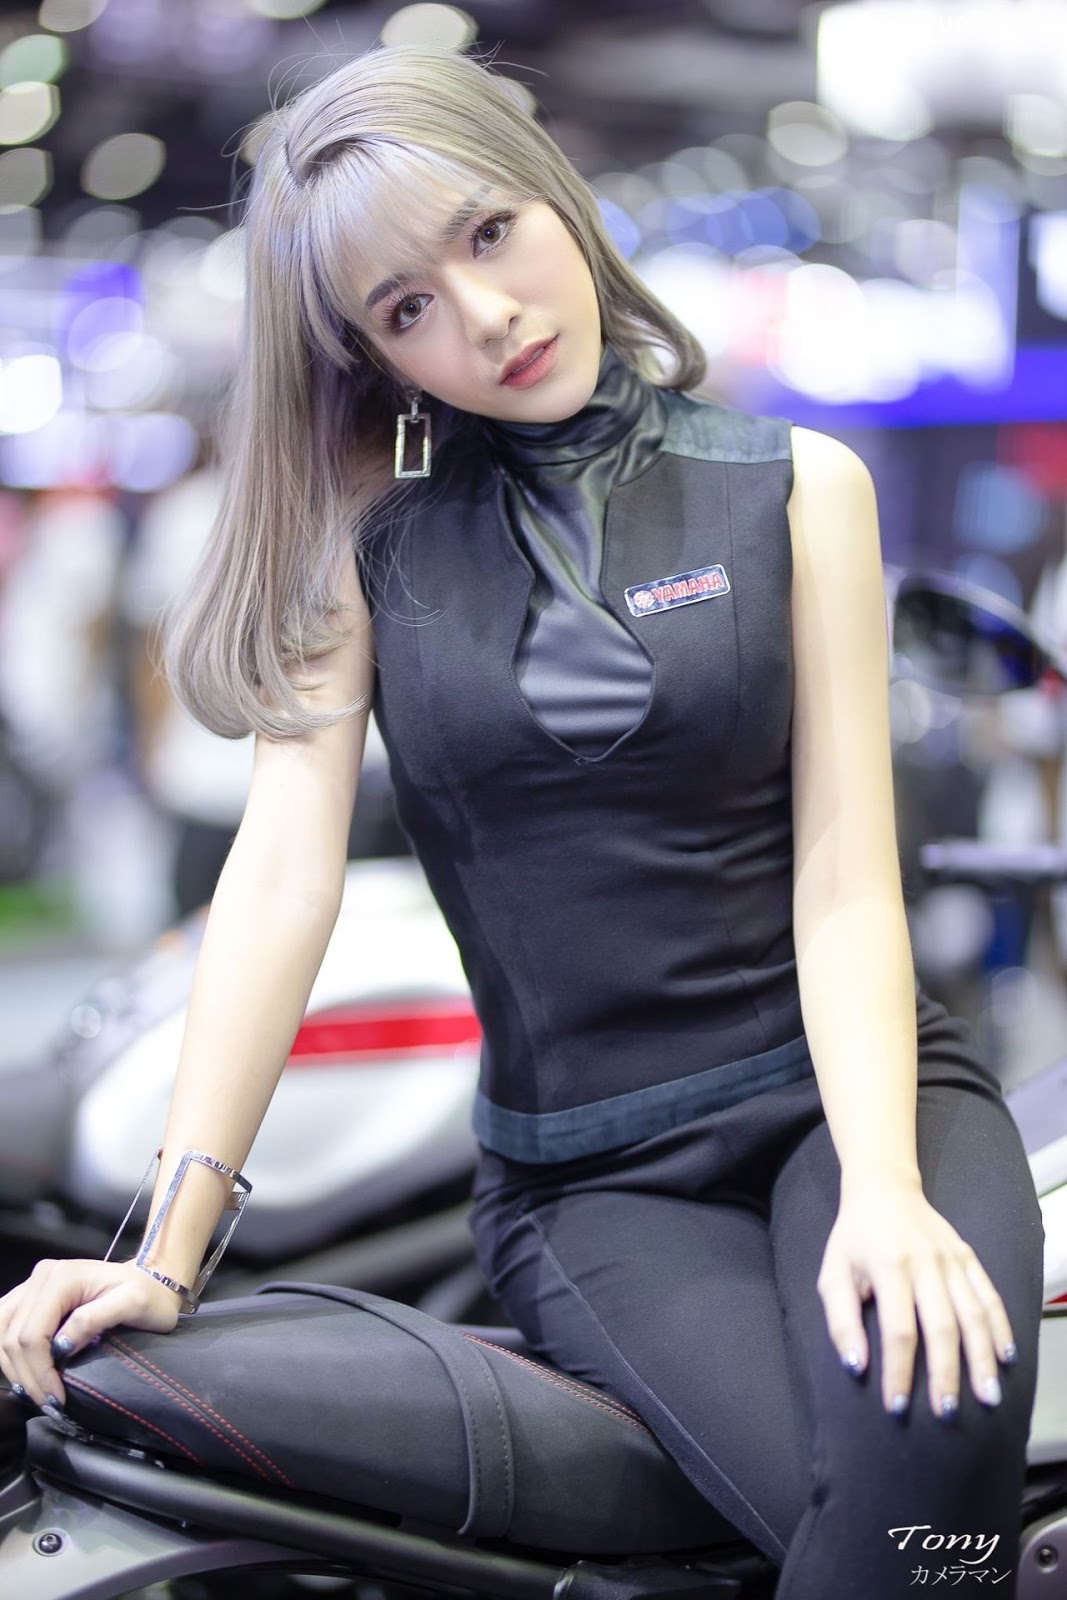 Image-Thailand-Hot-Model-Thai-Racing-Girl-At-Motor-Expo-2019-TruePic.net- Picture-76